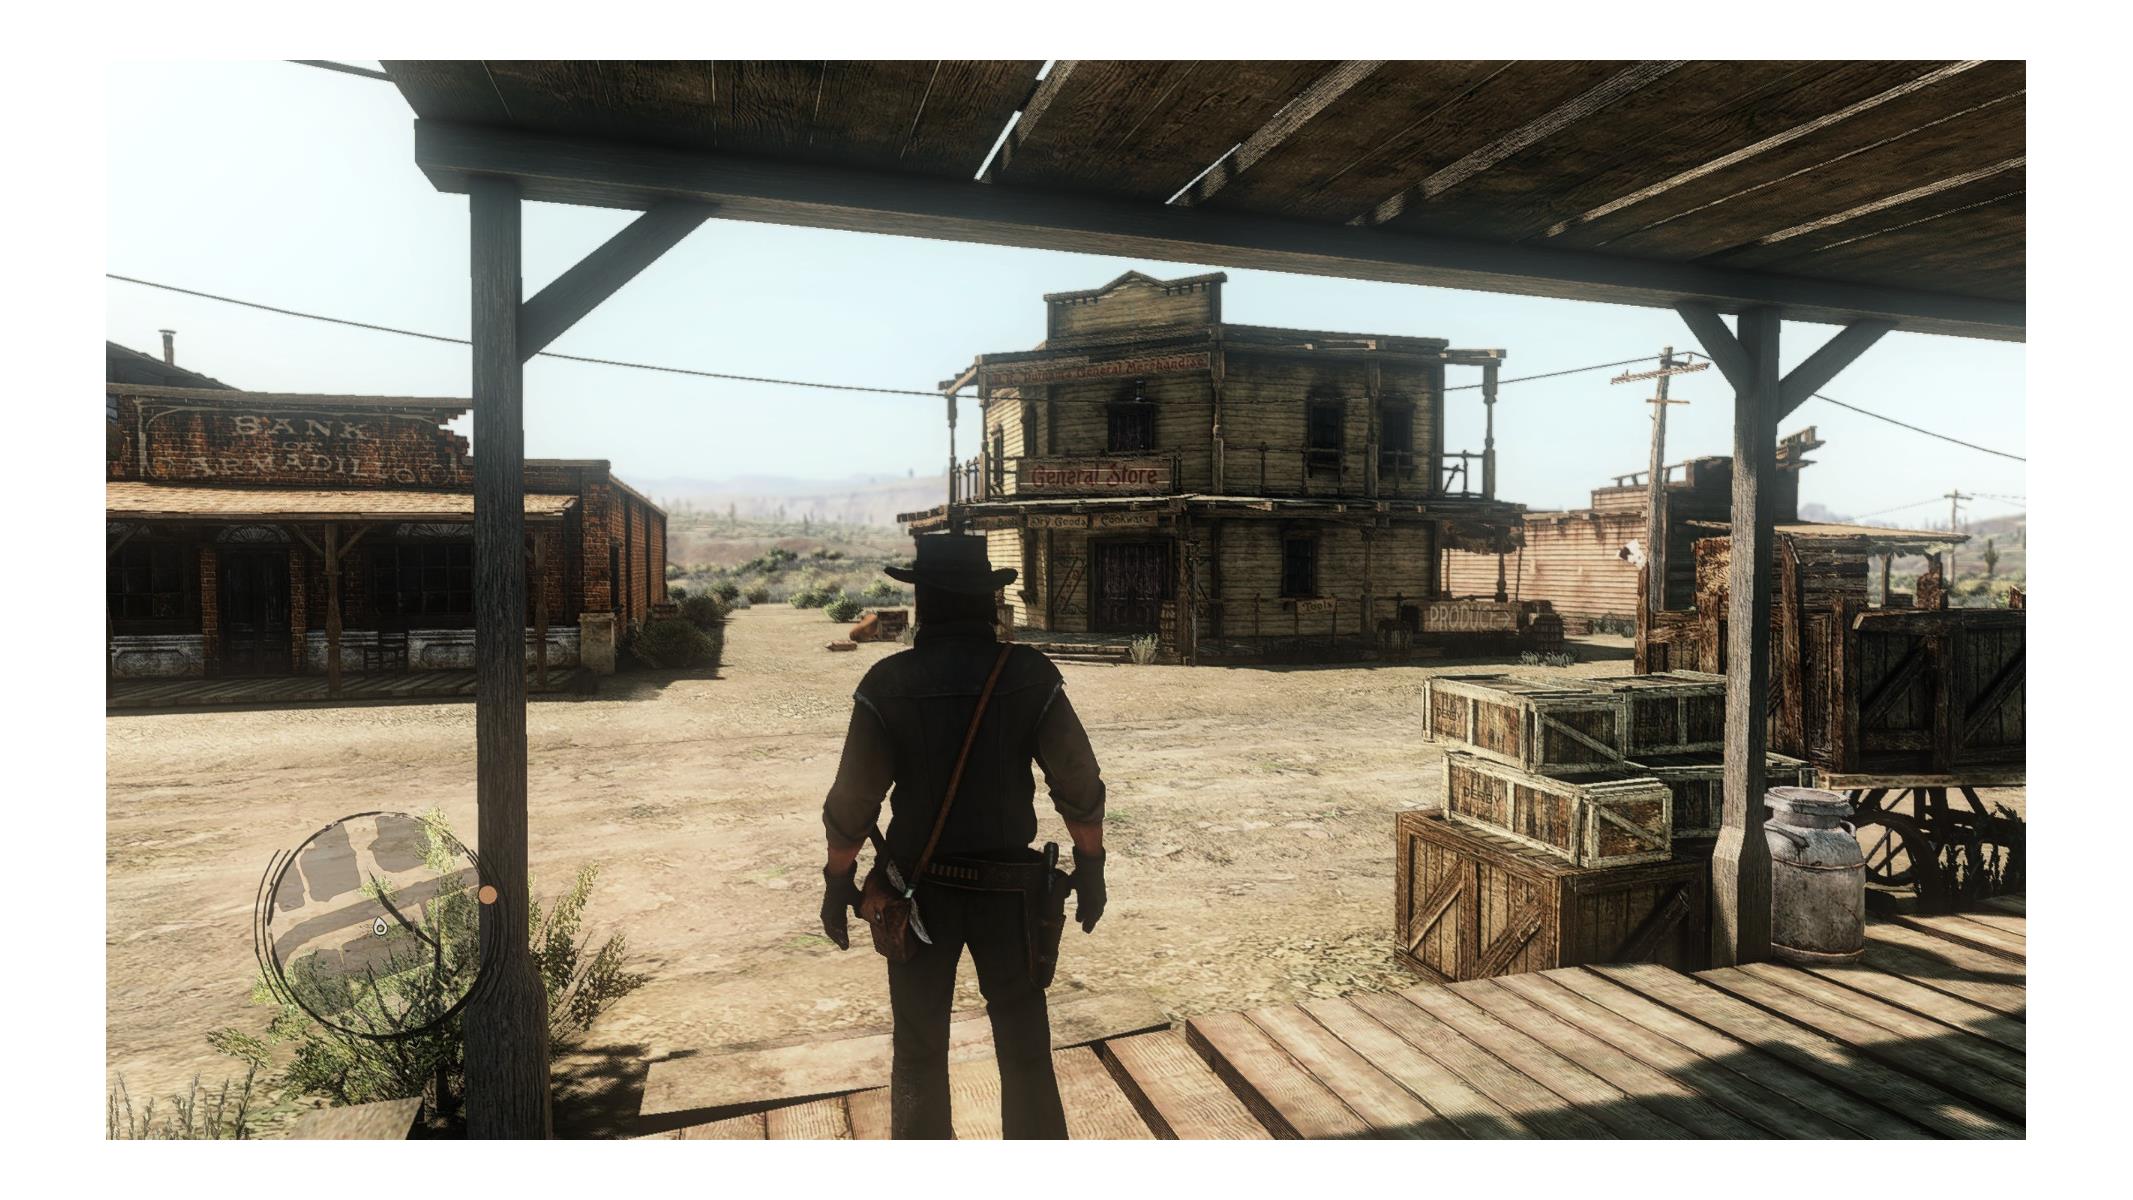 Red Dead Redemption Is More Than Playable on PC with RPCS3 and i9 9900K CPU